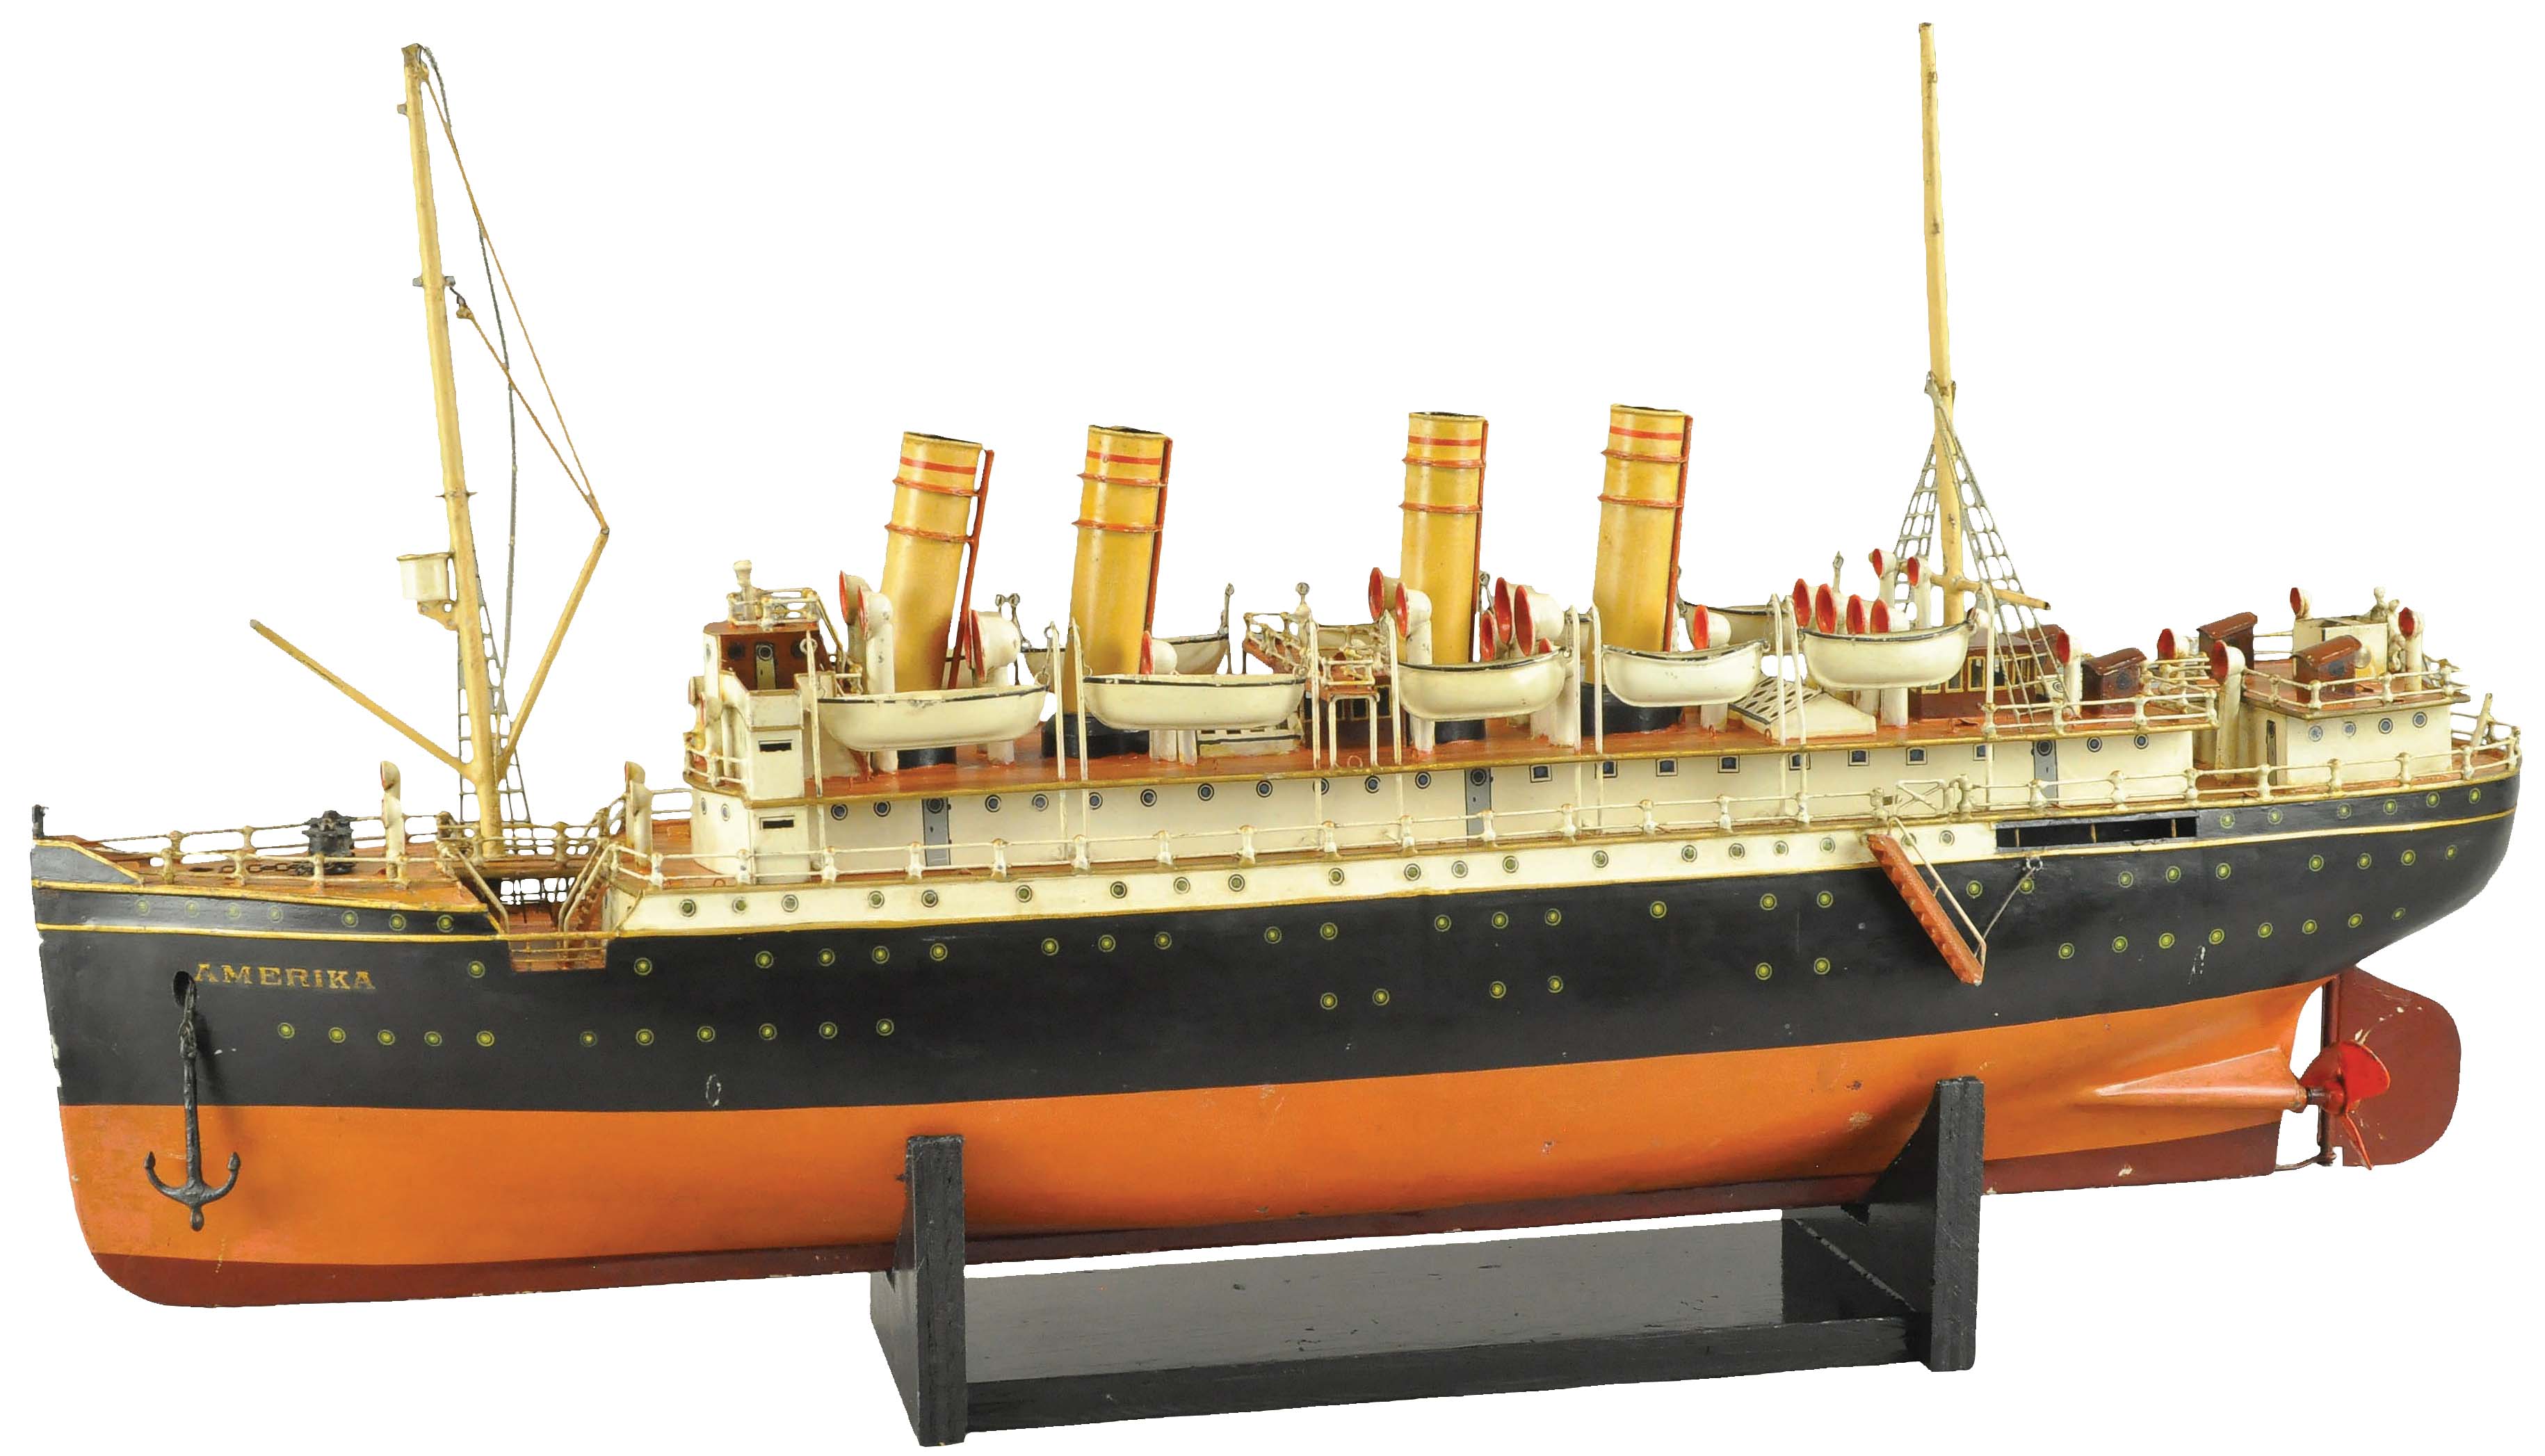 Marklin boat sells for record $271,400 at Bertoia toy auction